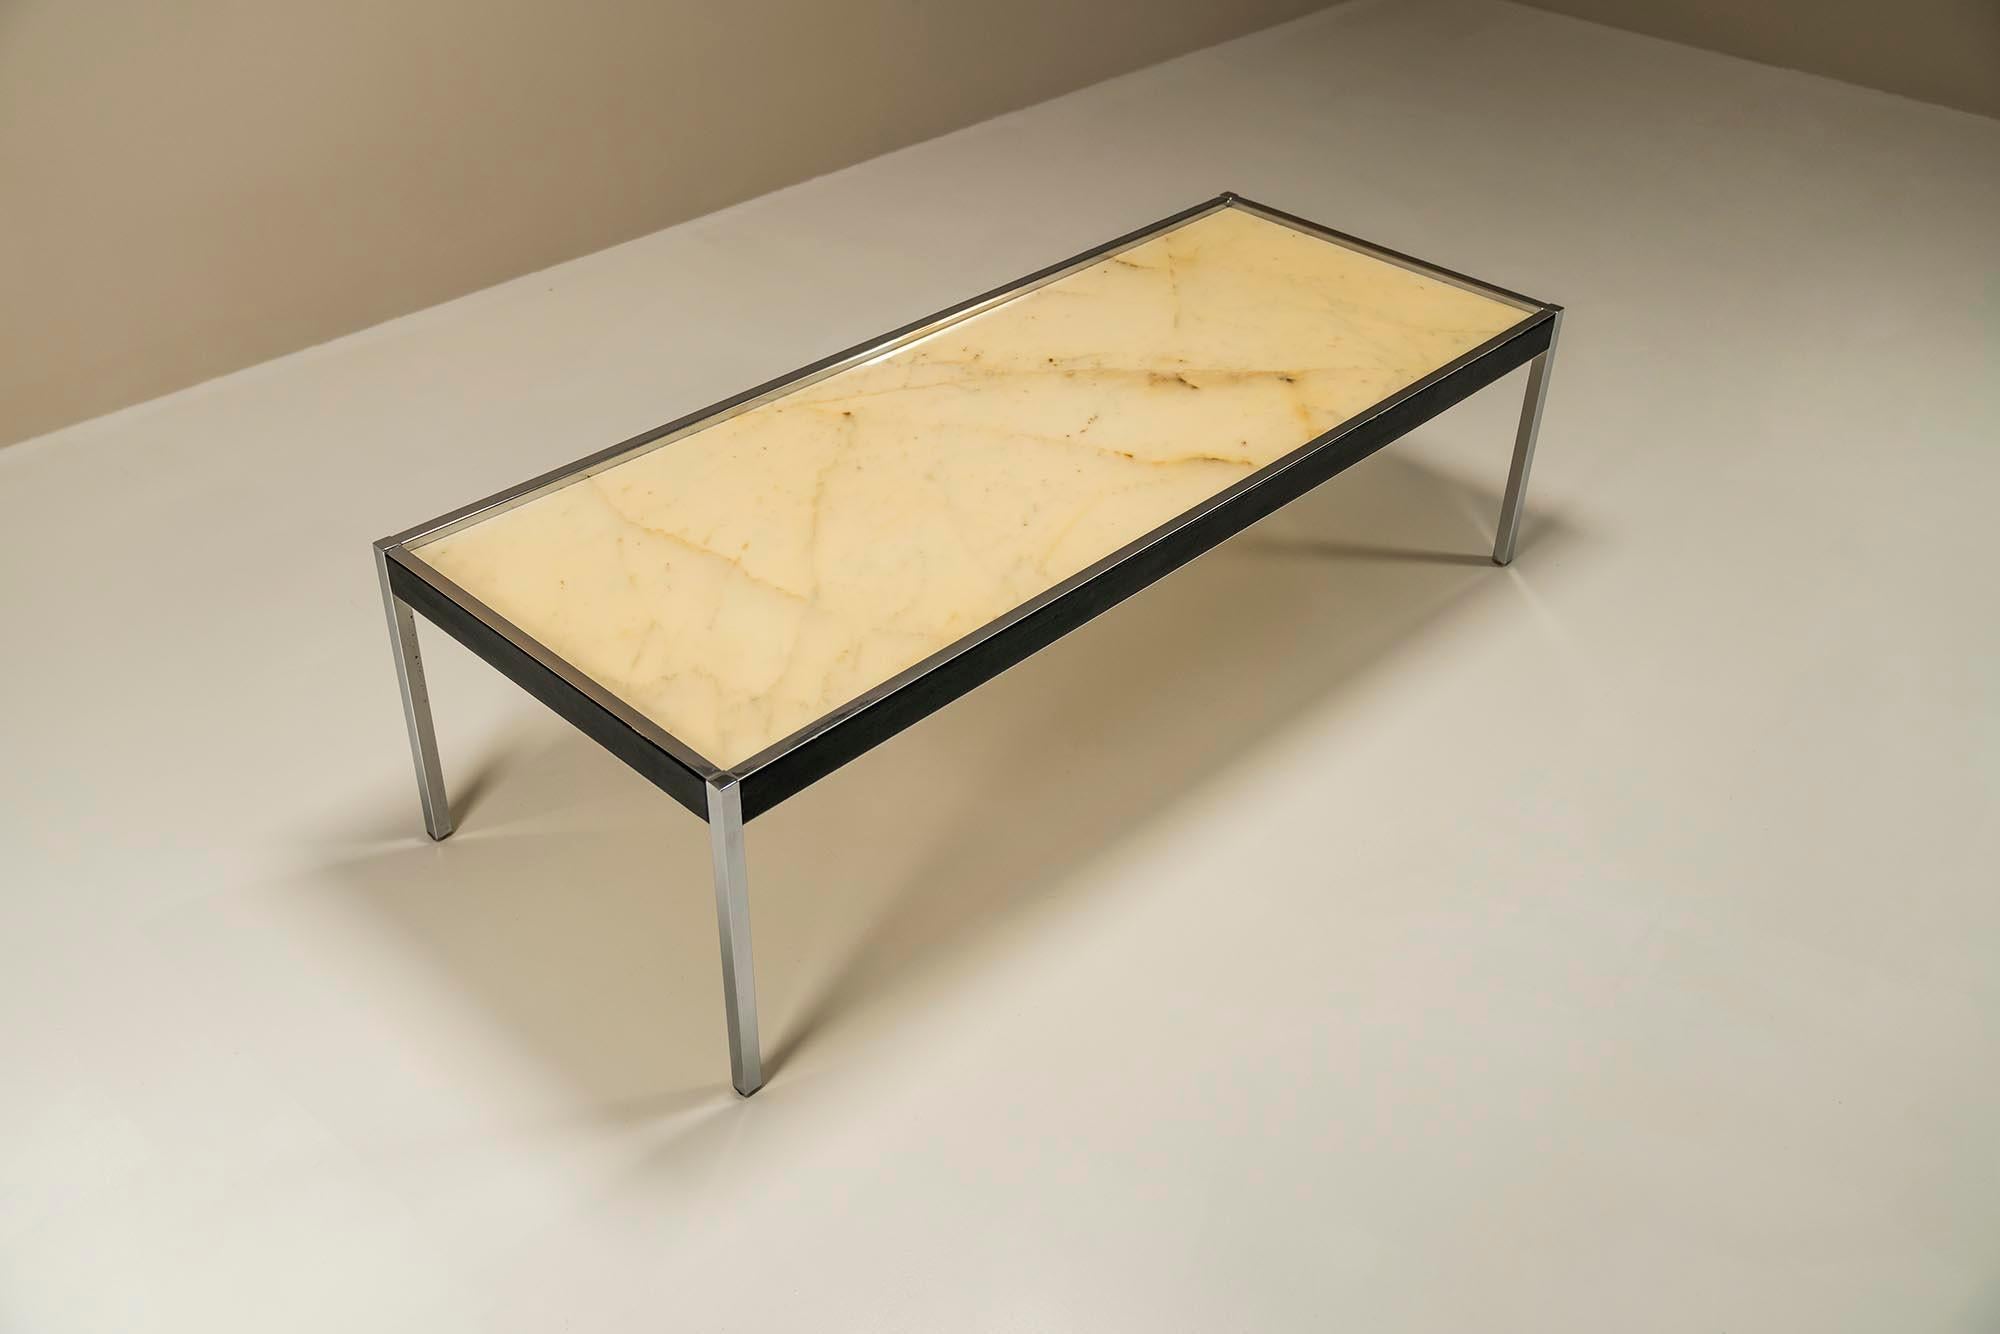 This coffee table is made of three materials that together form a pleasant combination. The main role is of course fully claimed by the crema marble top and shows a subtle play of lines and veins. Light orange streaks and underlying light gray